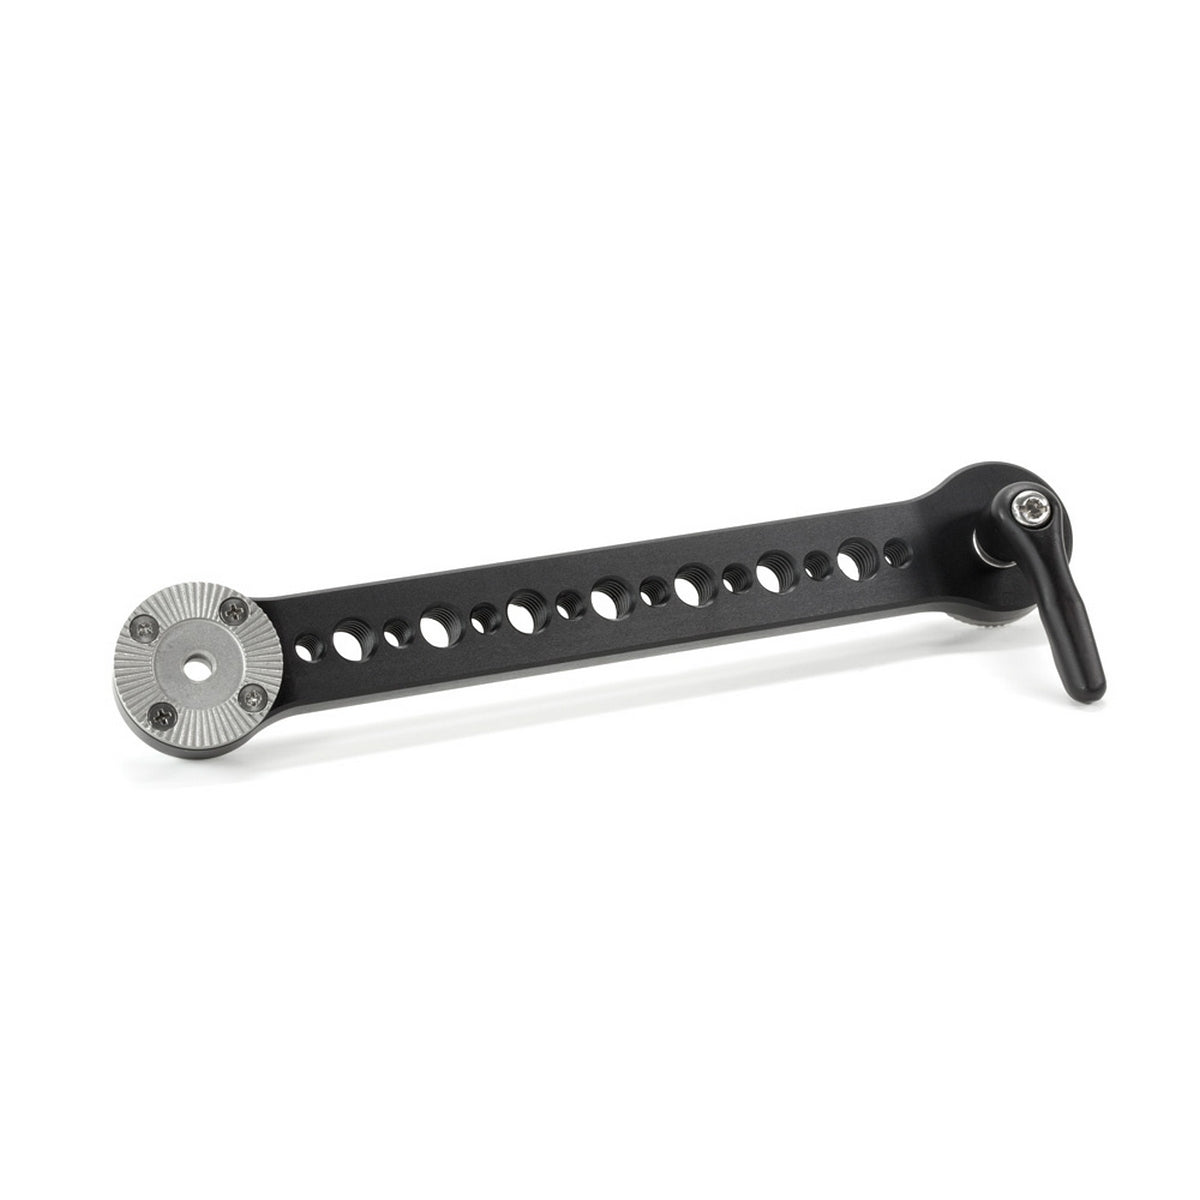 Wooden Camera 150600 | Rosette Extension Arm with ARRI Style Rosettes on Each End